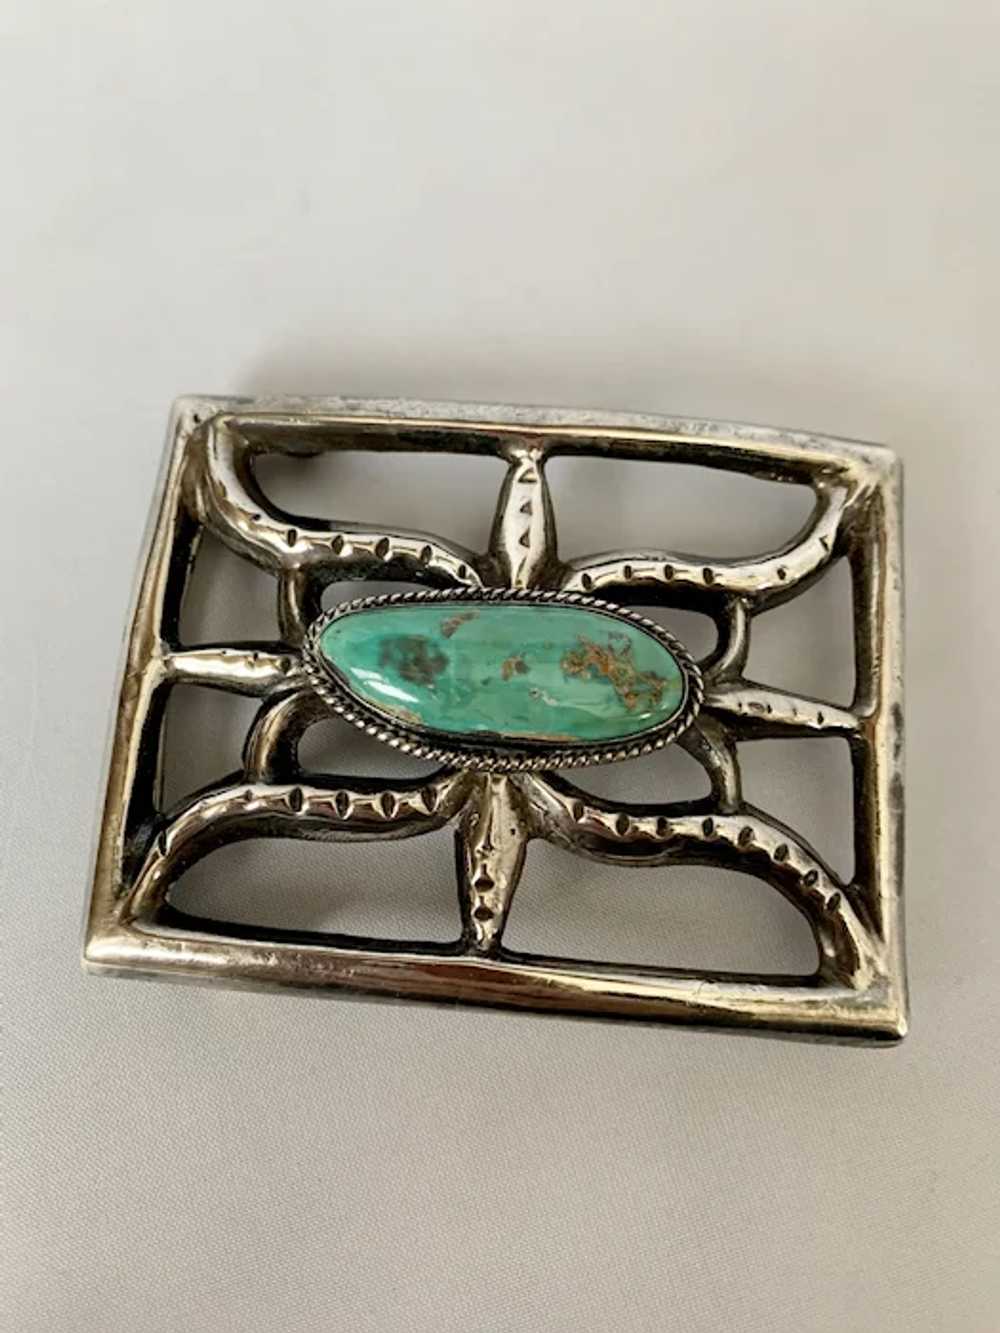 Sterling Sandcast and Turquoise Buckle - image 2